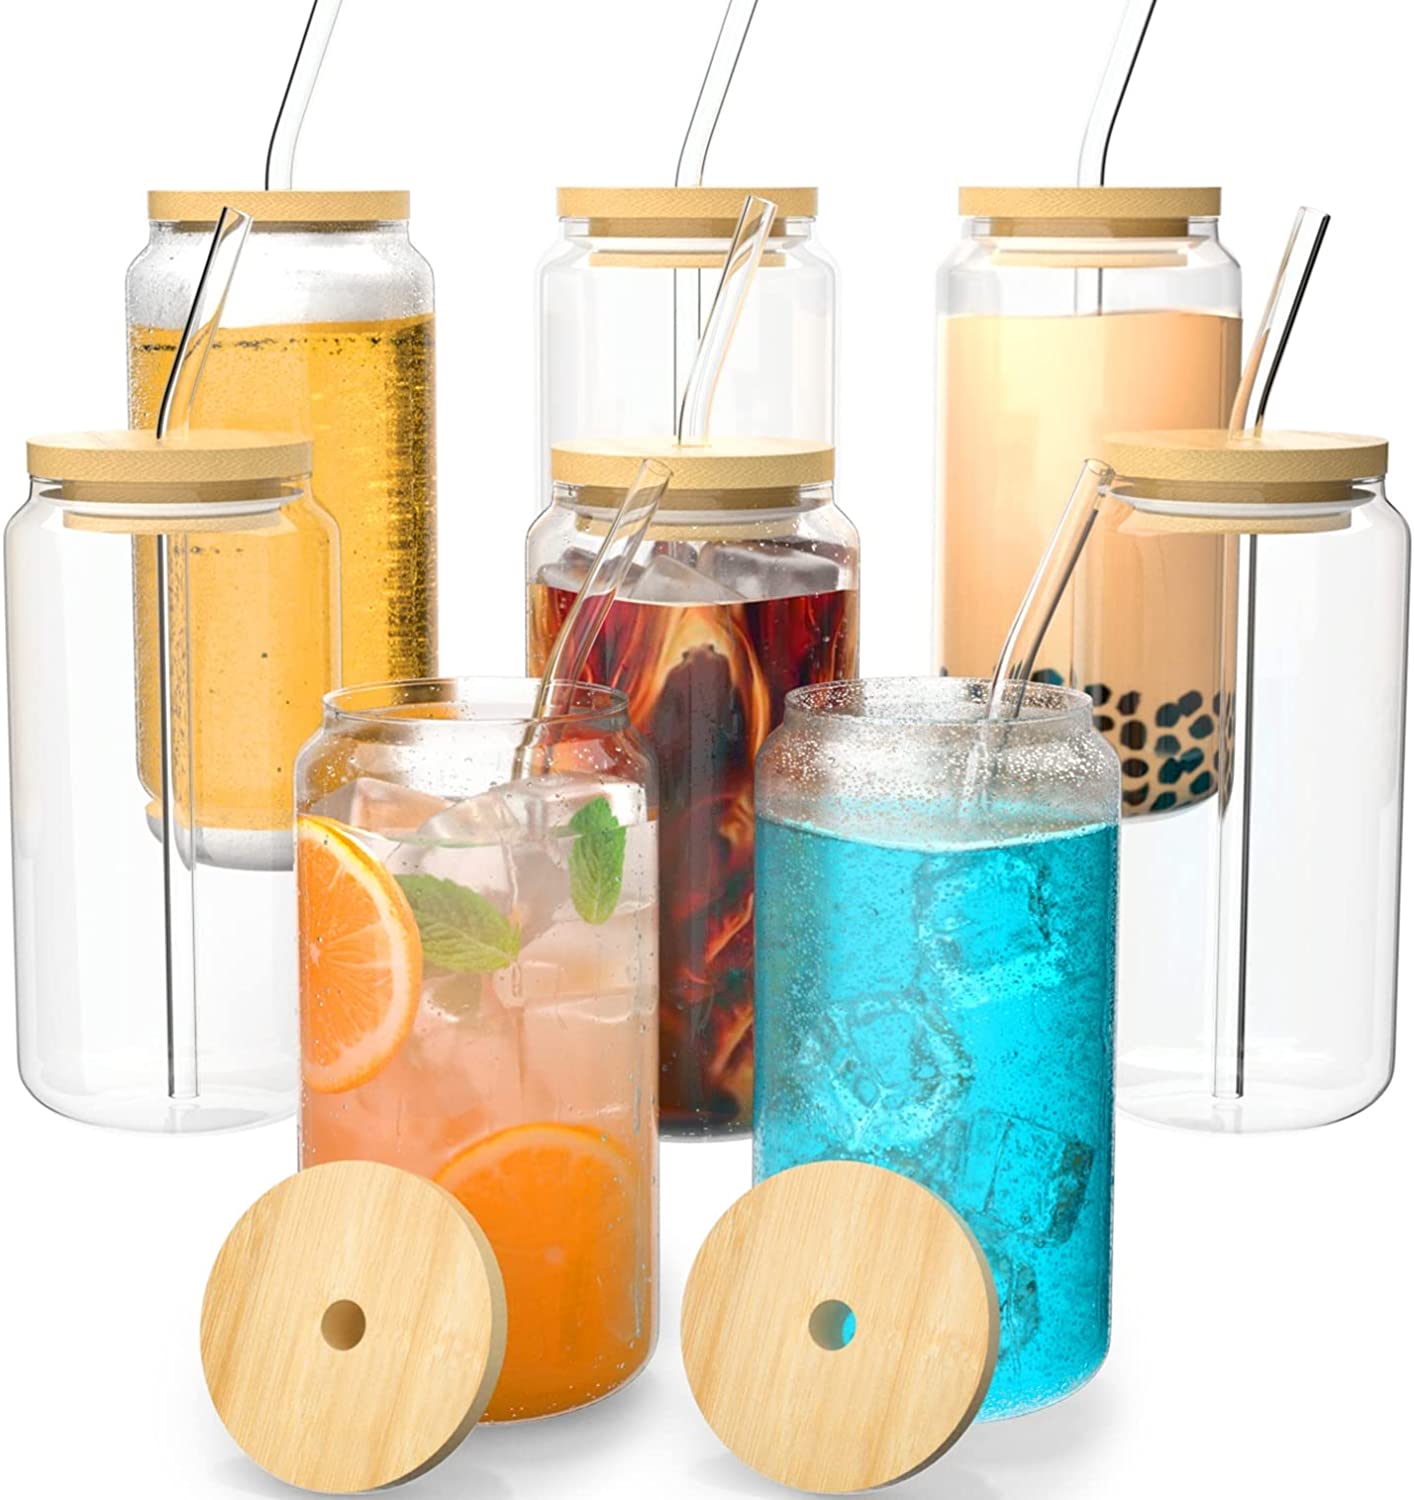 Vozoka Drinking Glasses with Bamboo Lids and Glass